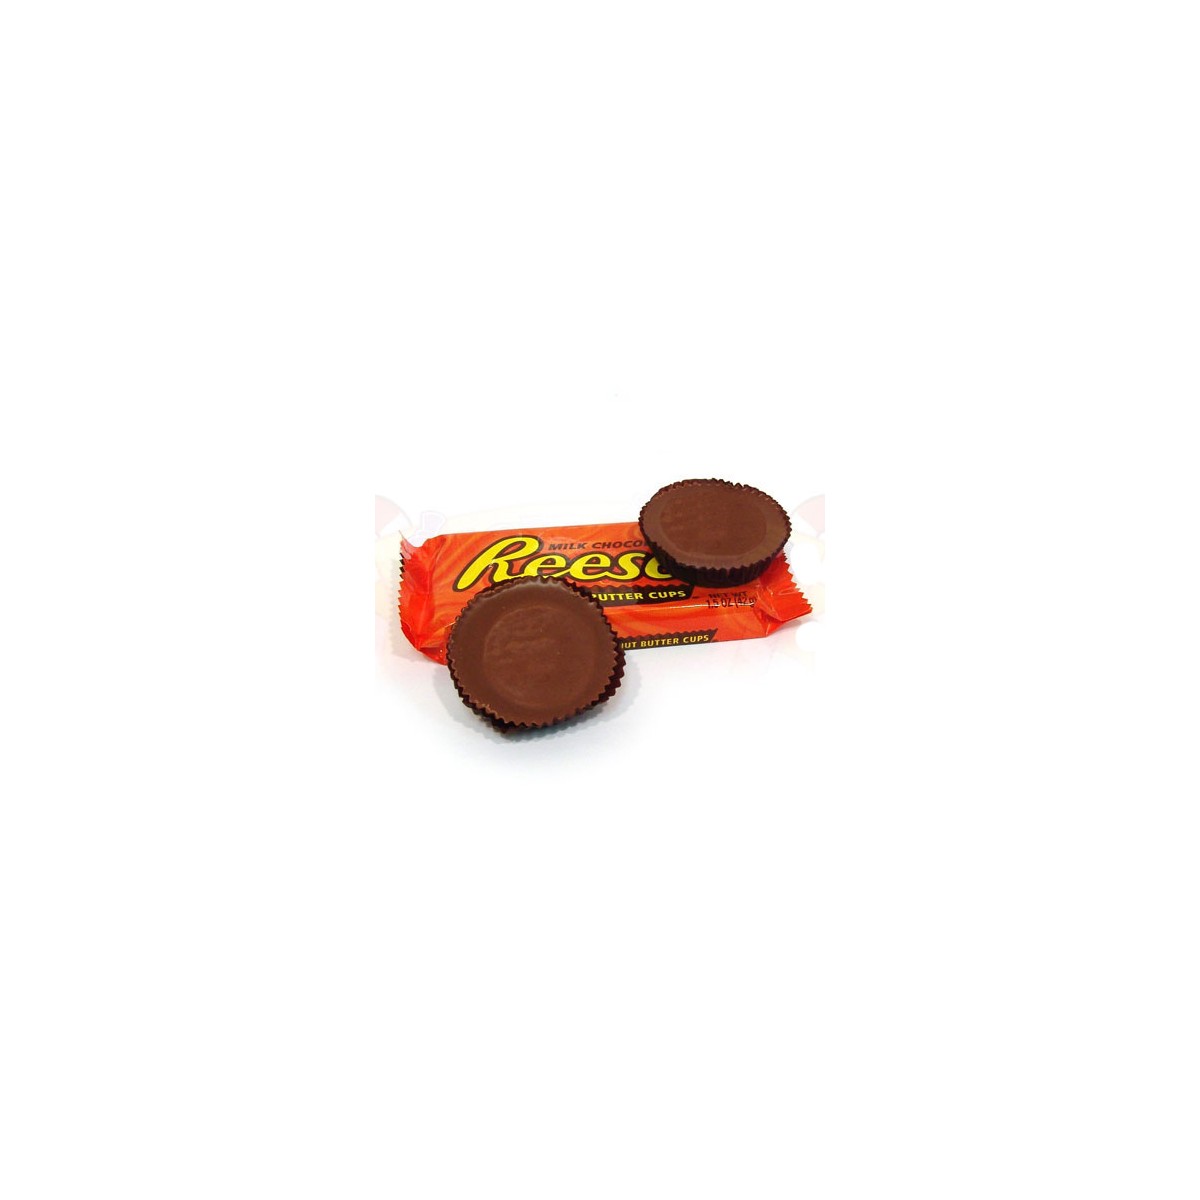 clip art reese's peanut butter cup - photo #44